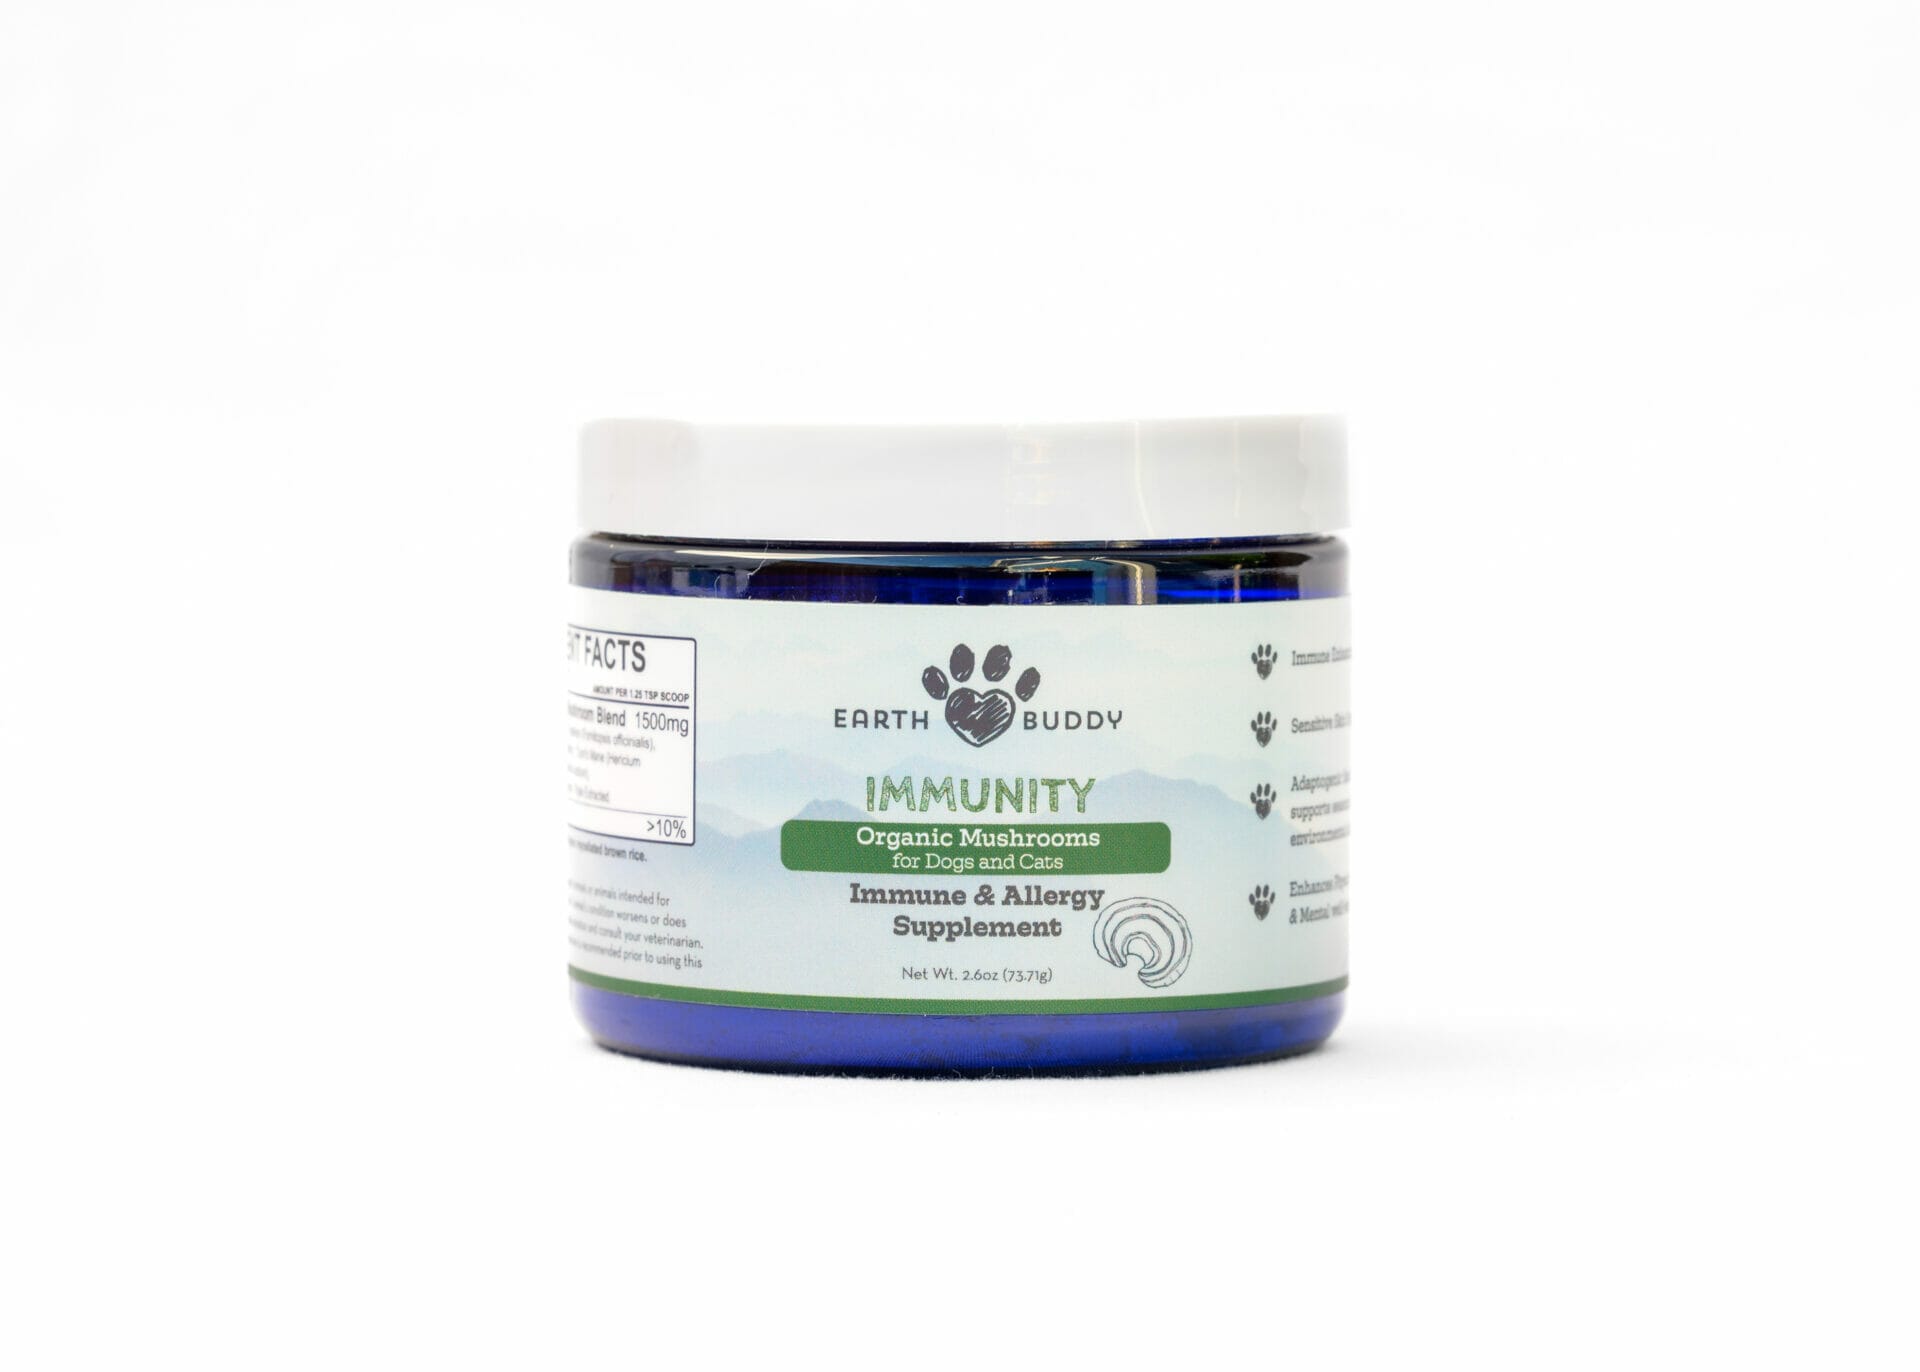 An allergy & immunity supplement for dogs powder made from functional mushrooms from Earth Buddy.